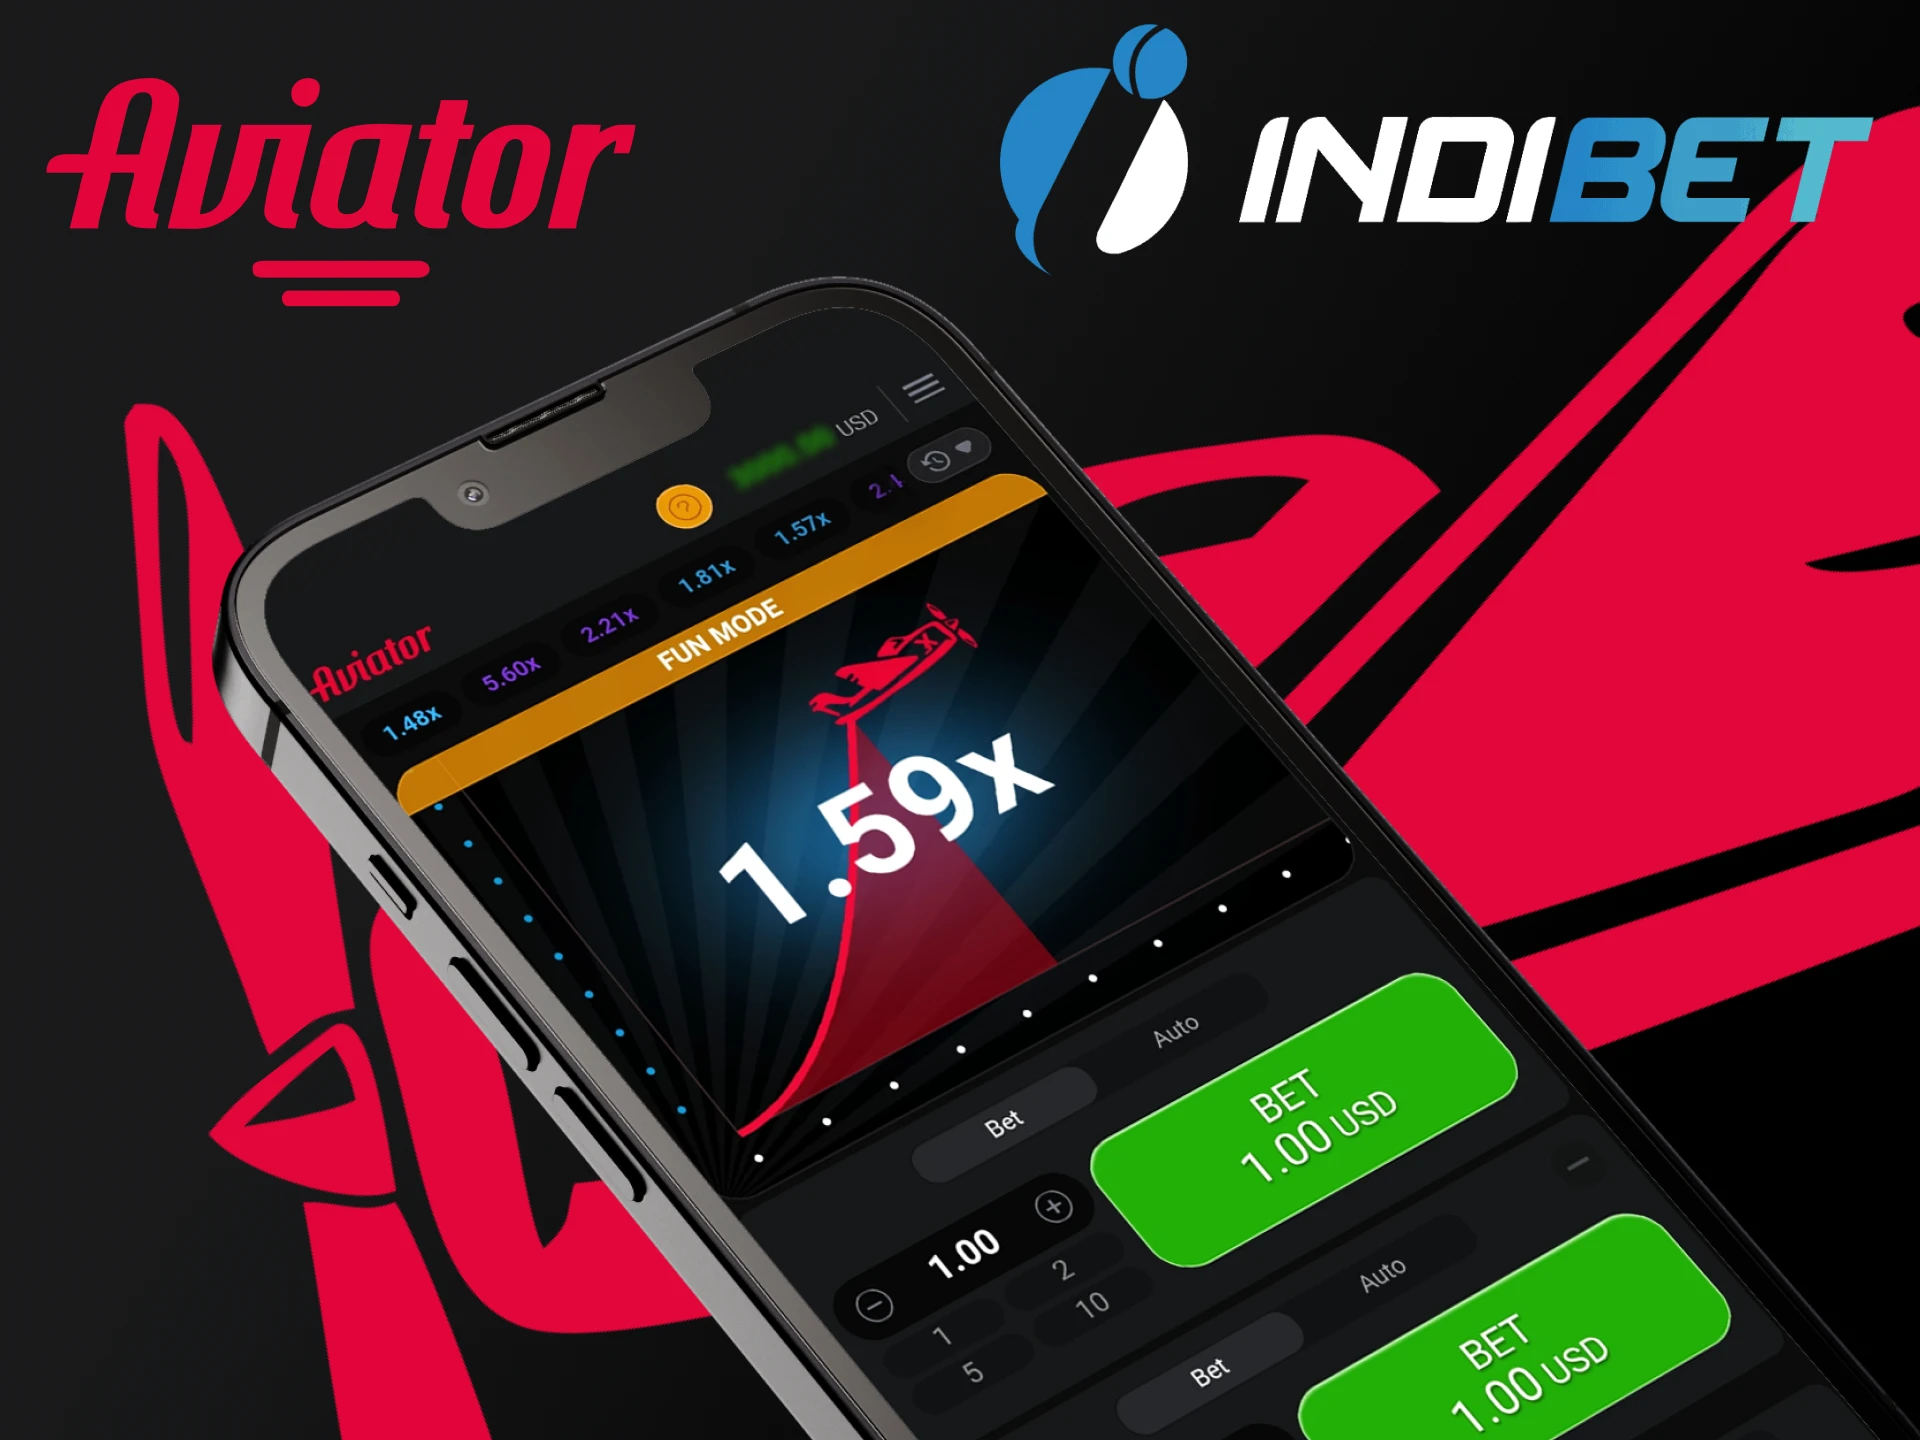 You can play the Aviator game with the Indibet app on your Android device.